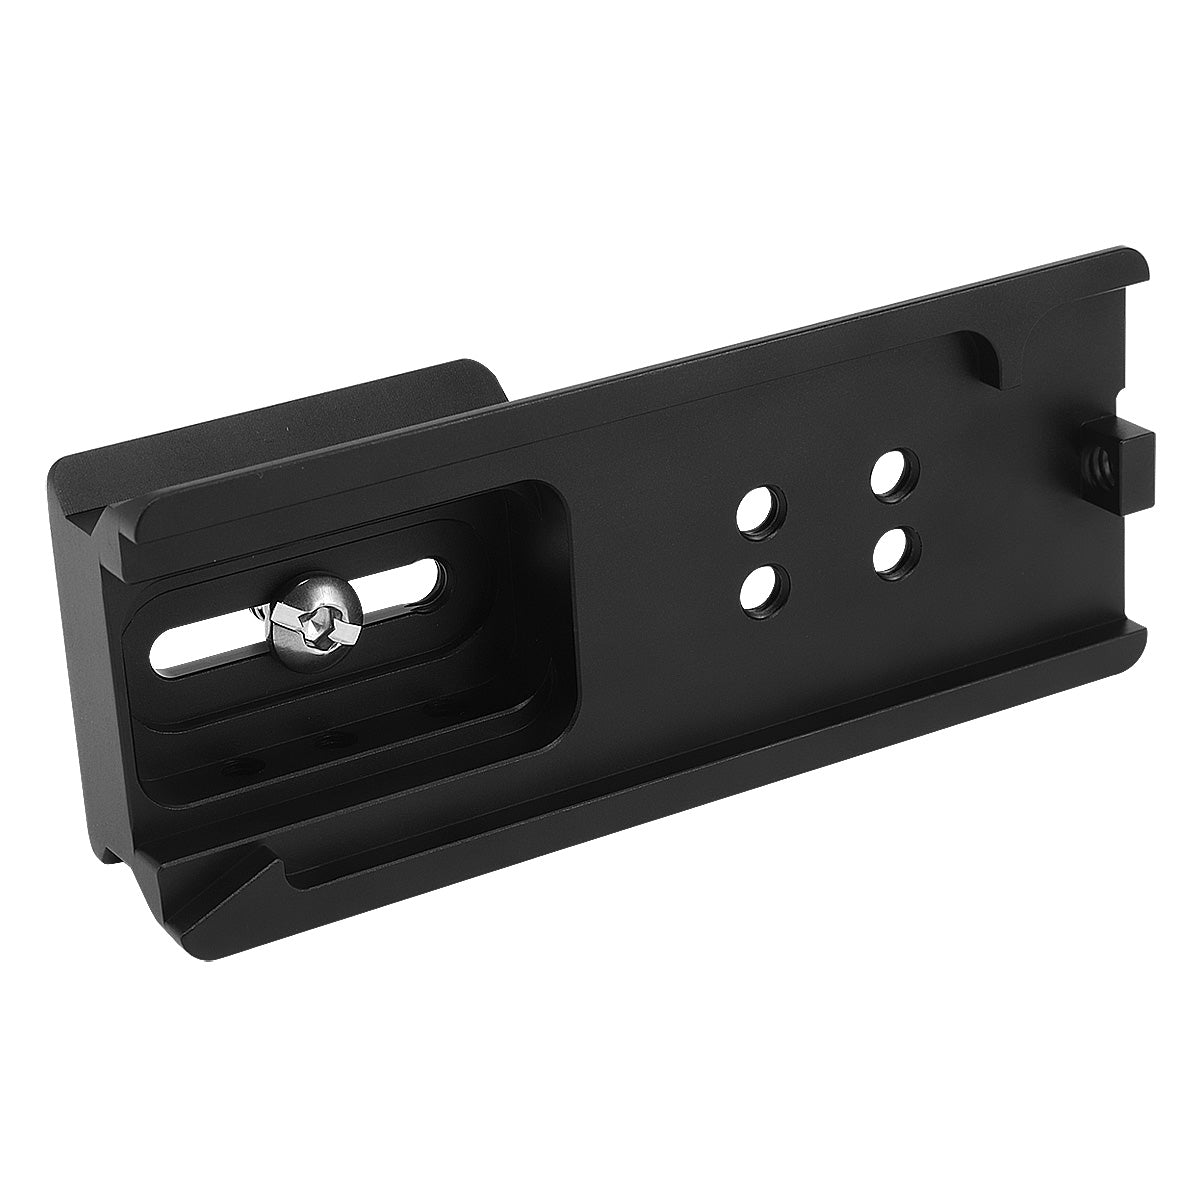 Haoge HRP-ZY3 Camera Height Riser Quick Release Plate for Zhiyun Zhi yun Crane 3 LAB Gimbal Stabilizer